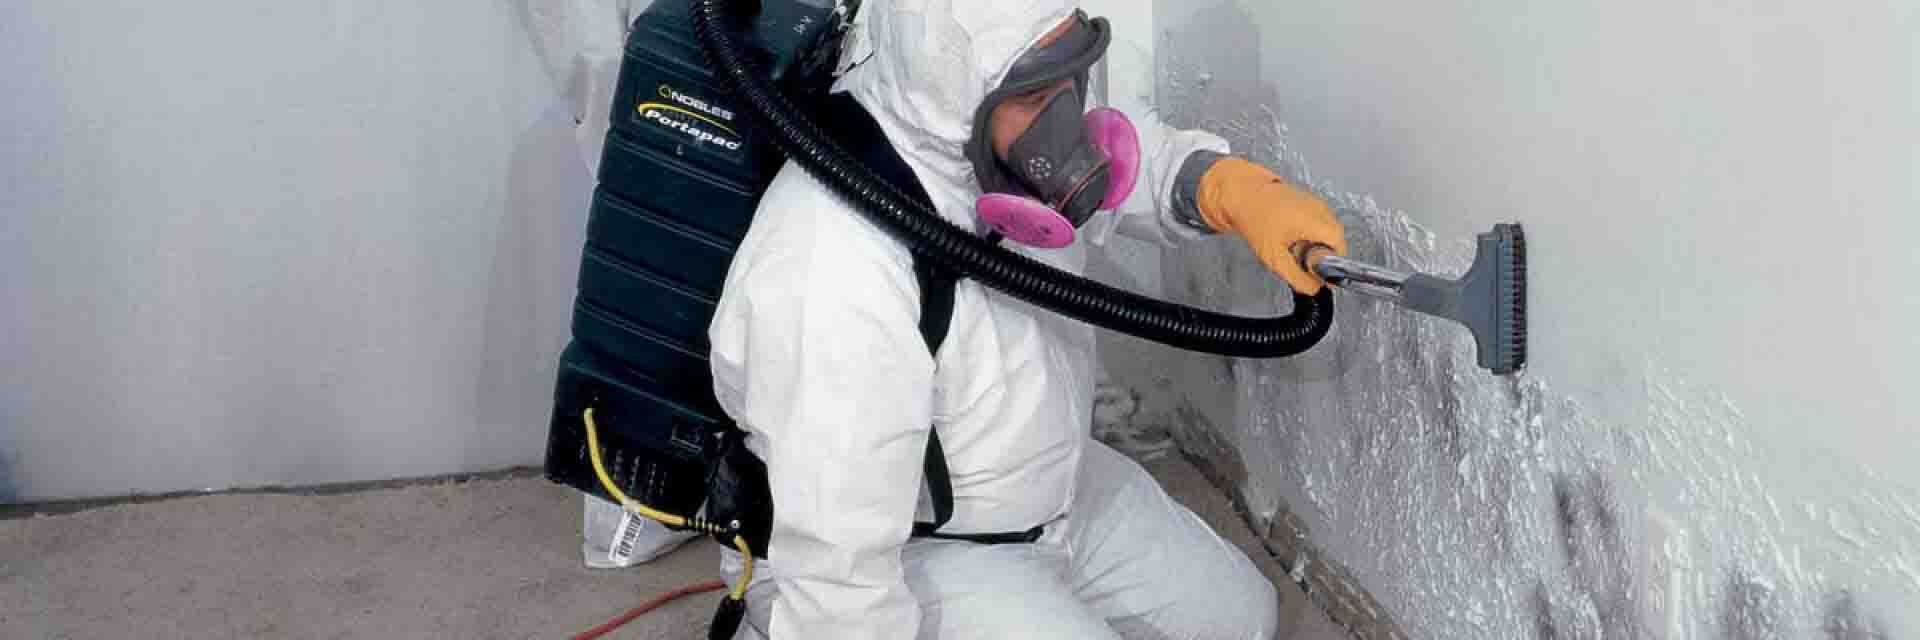 remediation, removal, inspection, remove, mold, removed, remediation service, mold testing, mold remediation, remove mold, removing mold, mold remover, removing